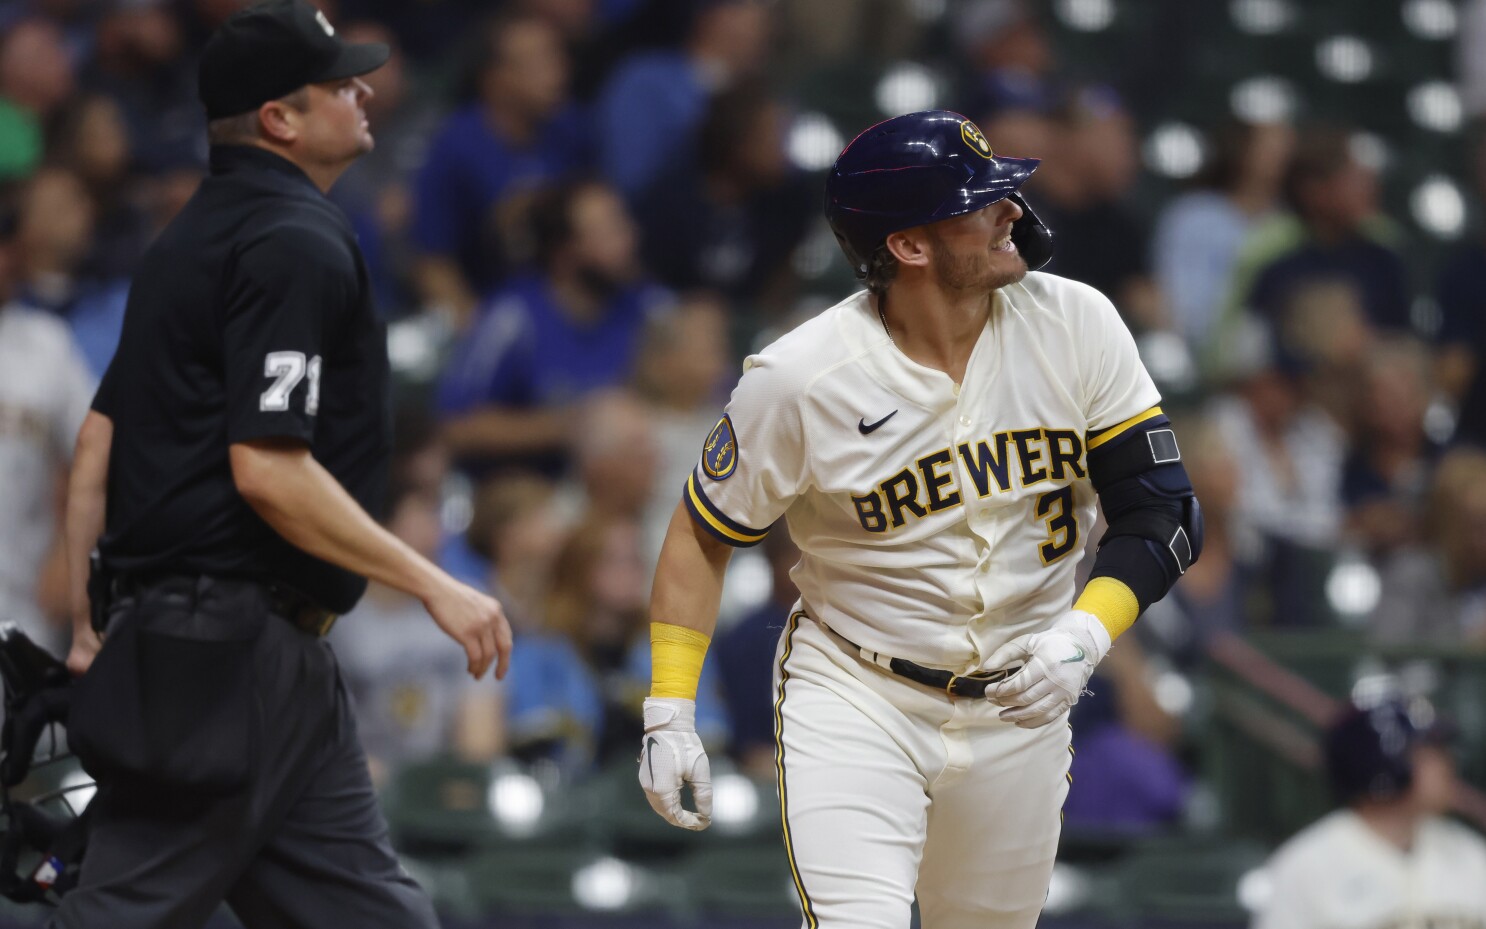 Brewers place Peralta on IL, Hader on family emergency list